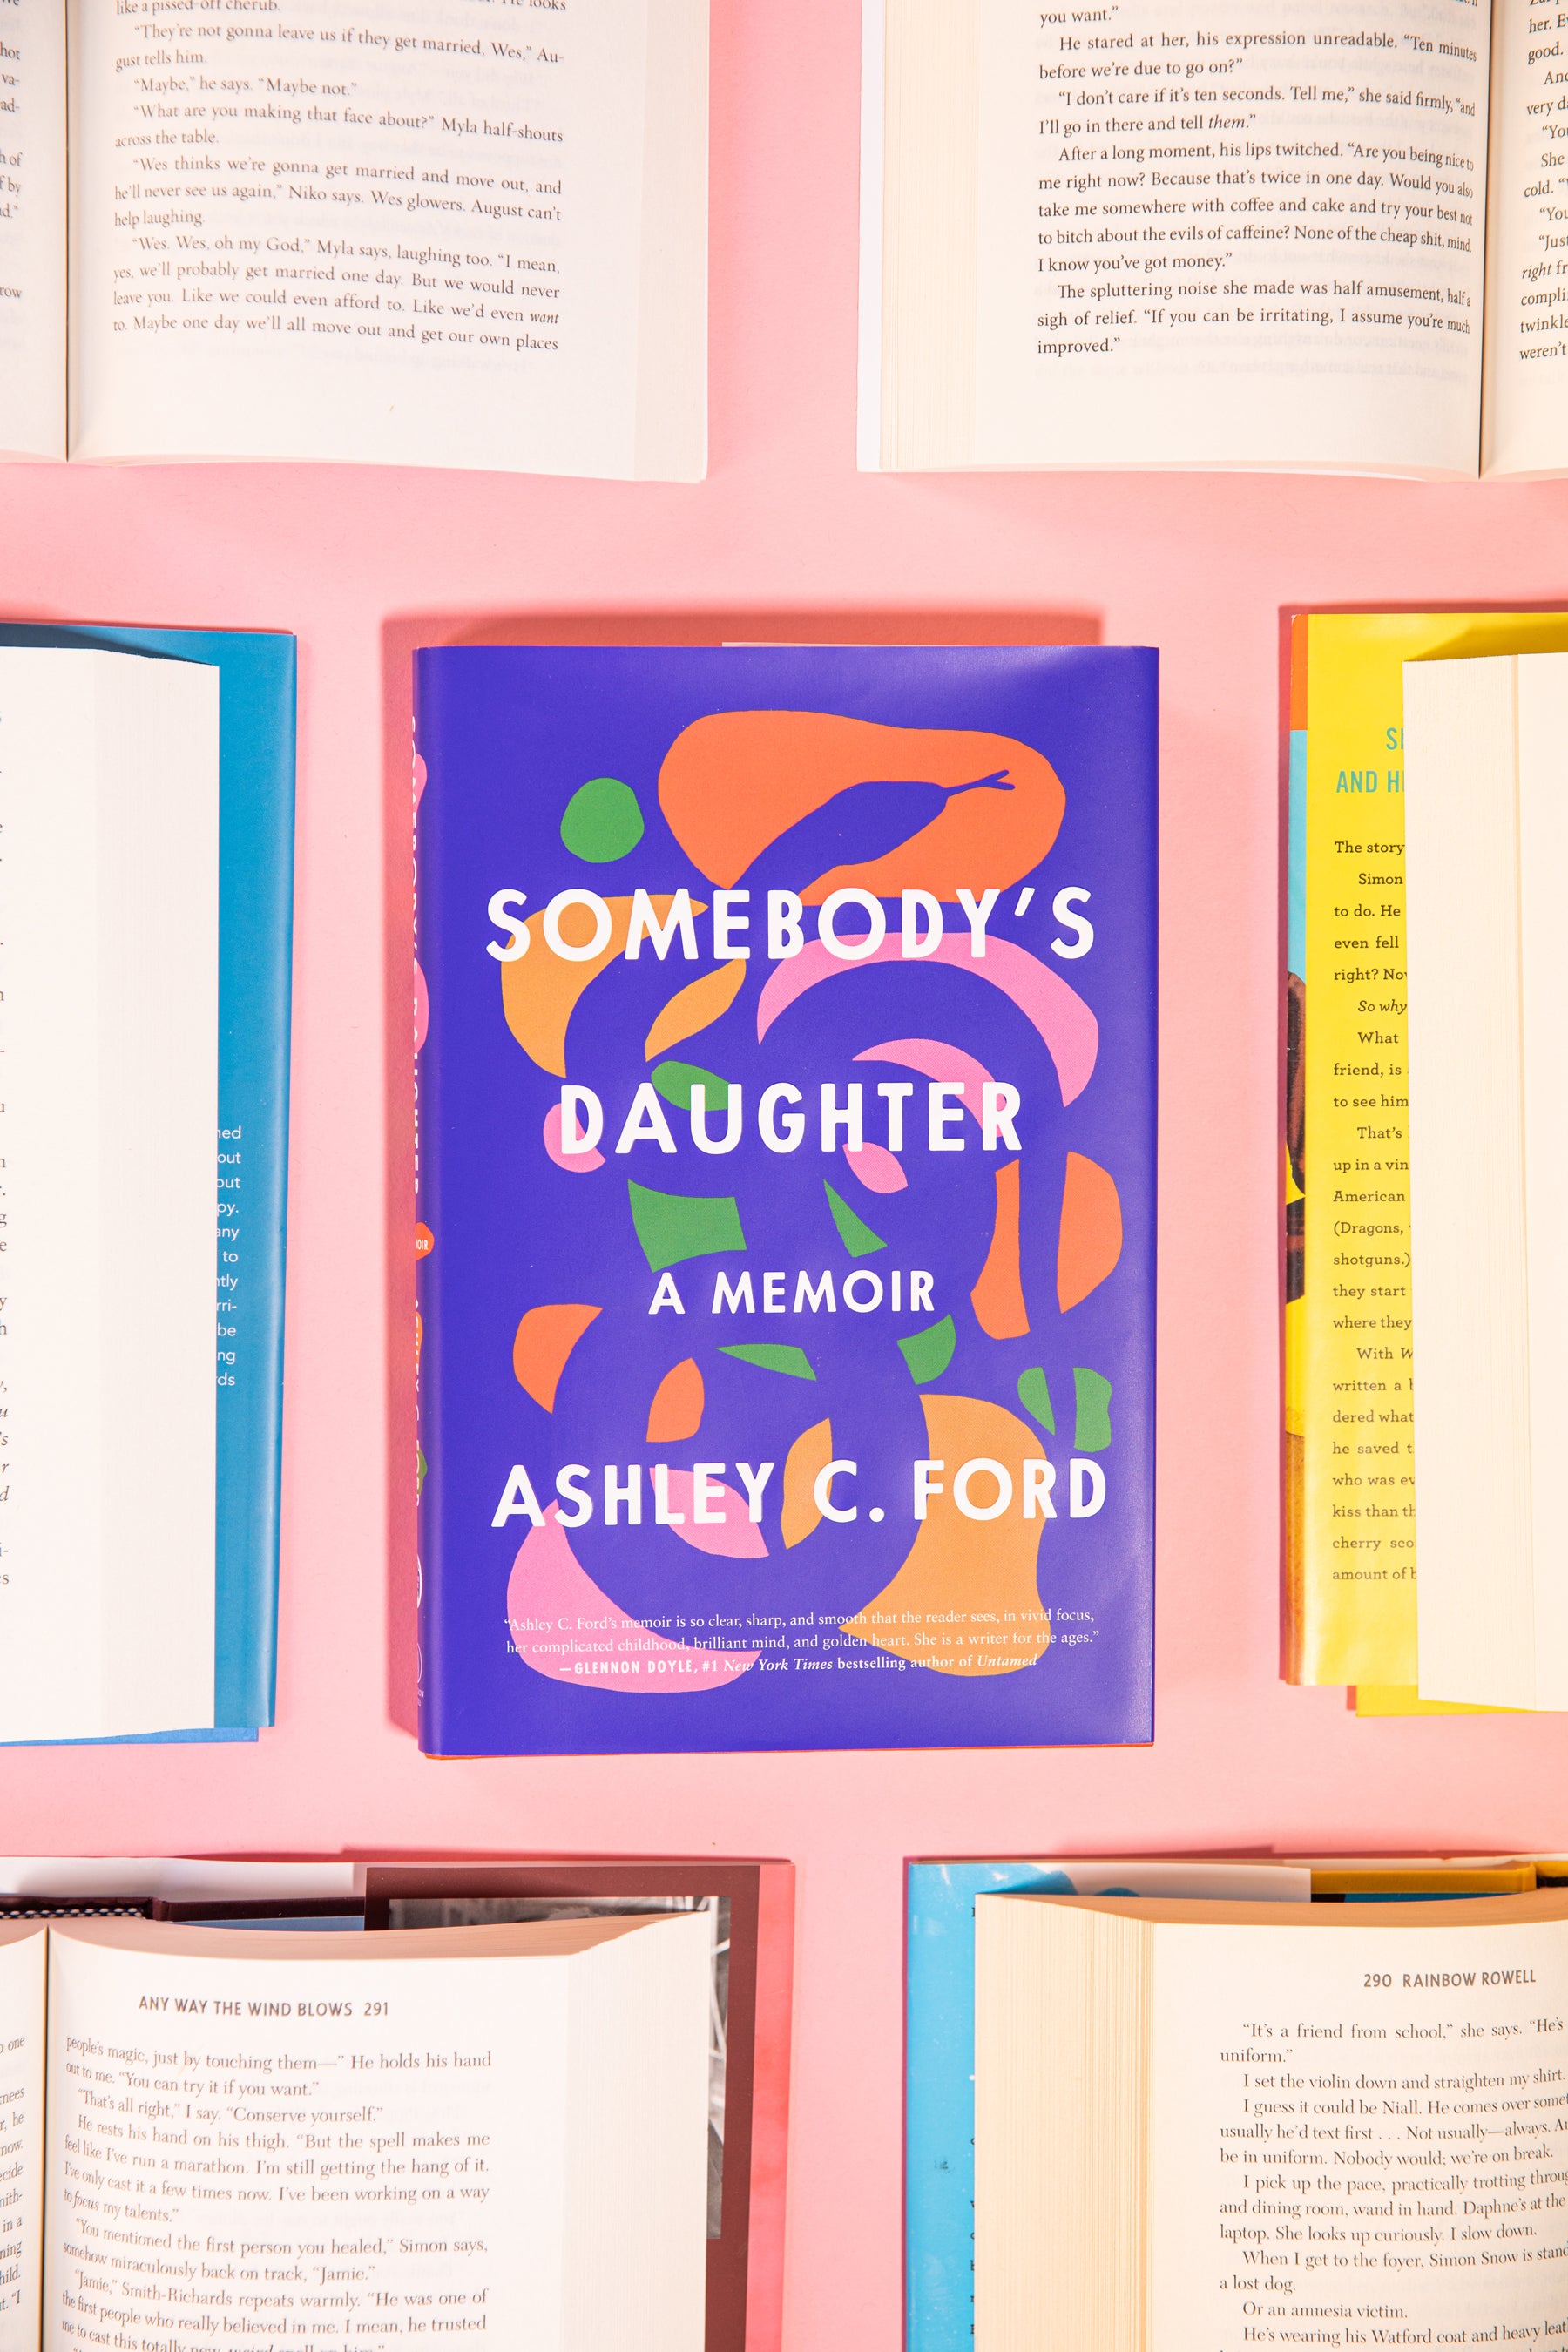 Somebody's Daughter, by Ashley C. Ford